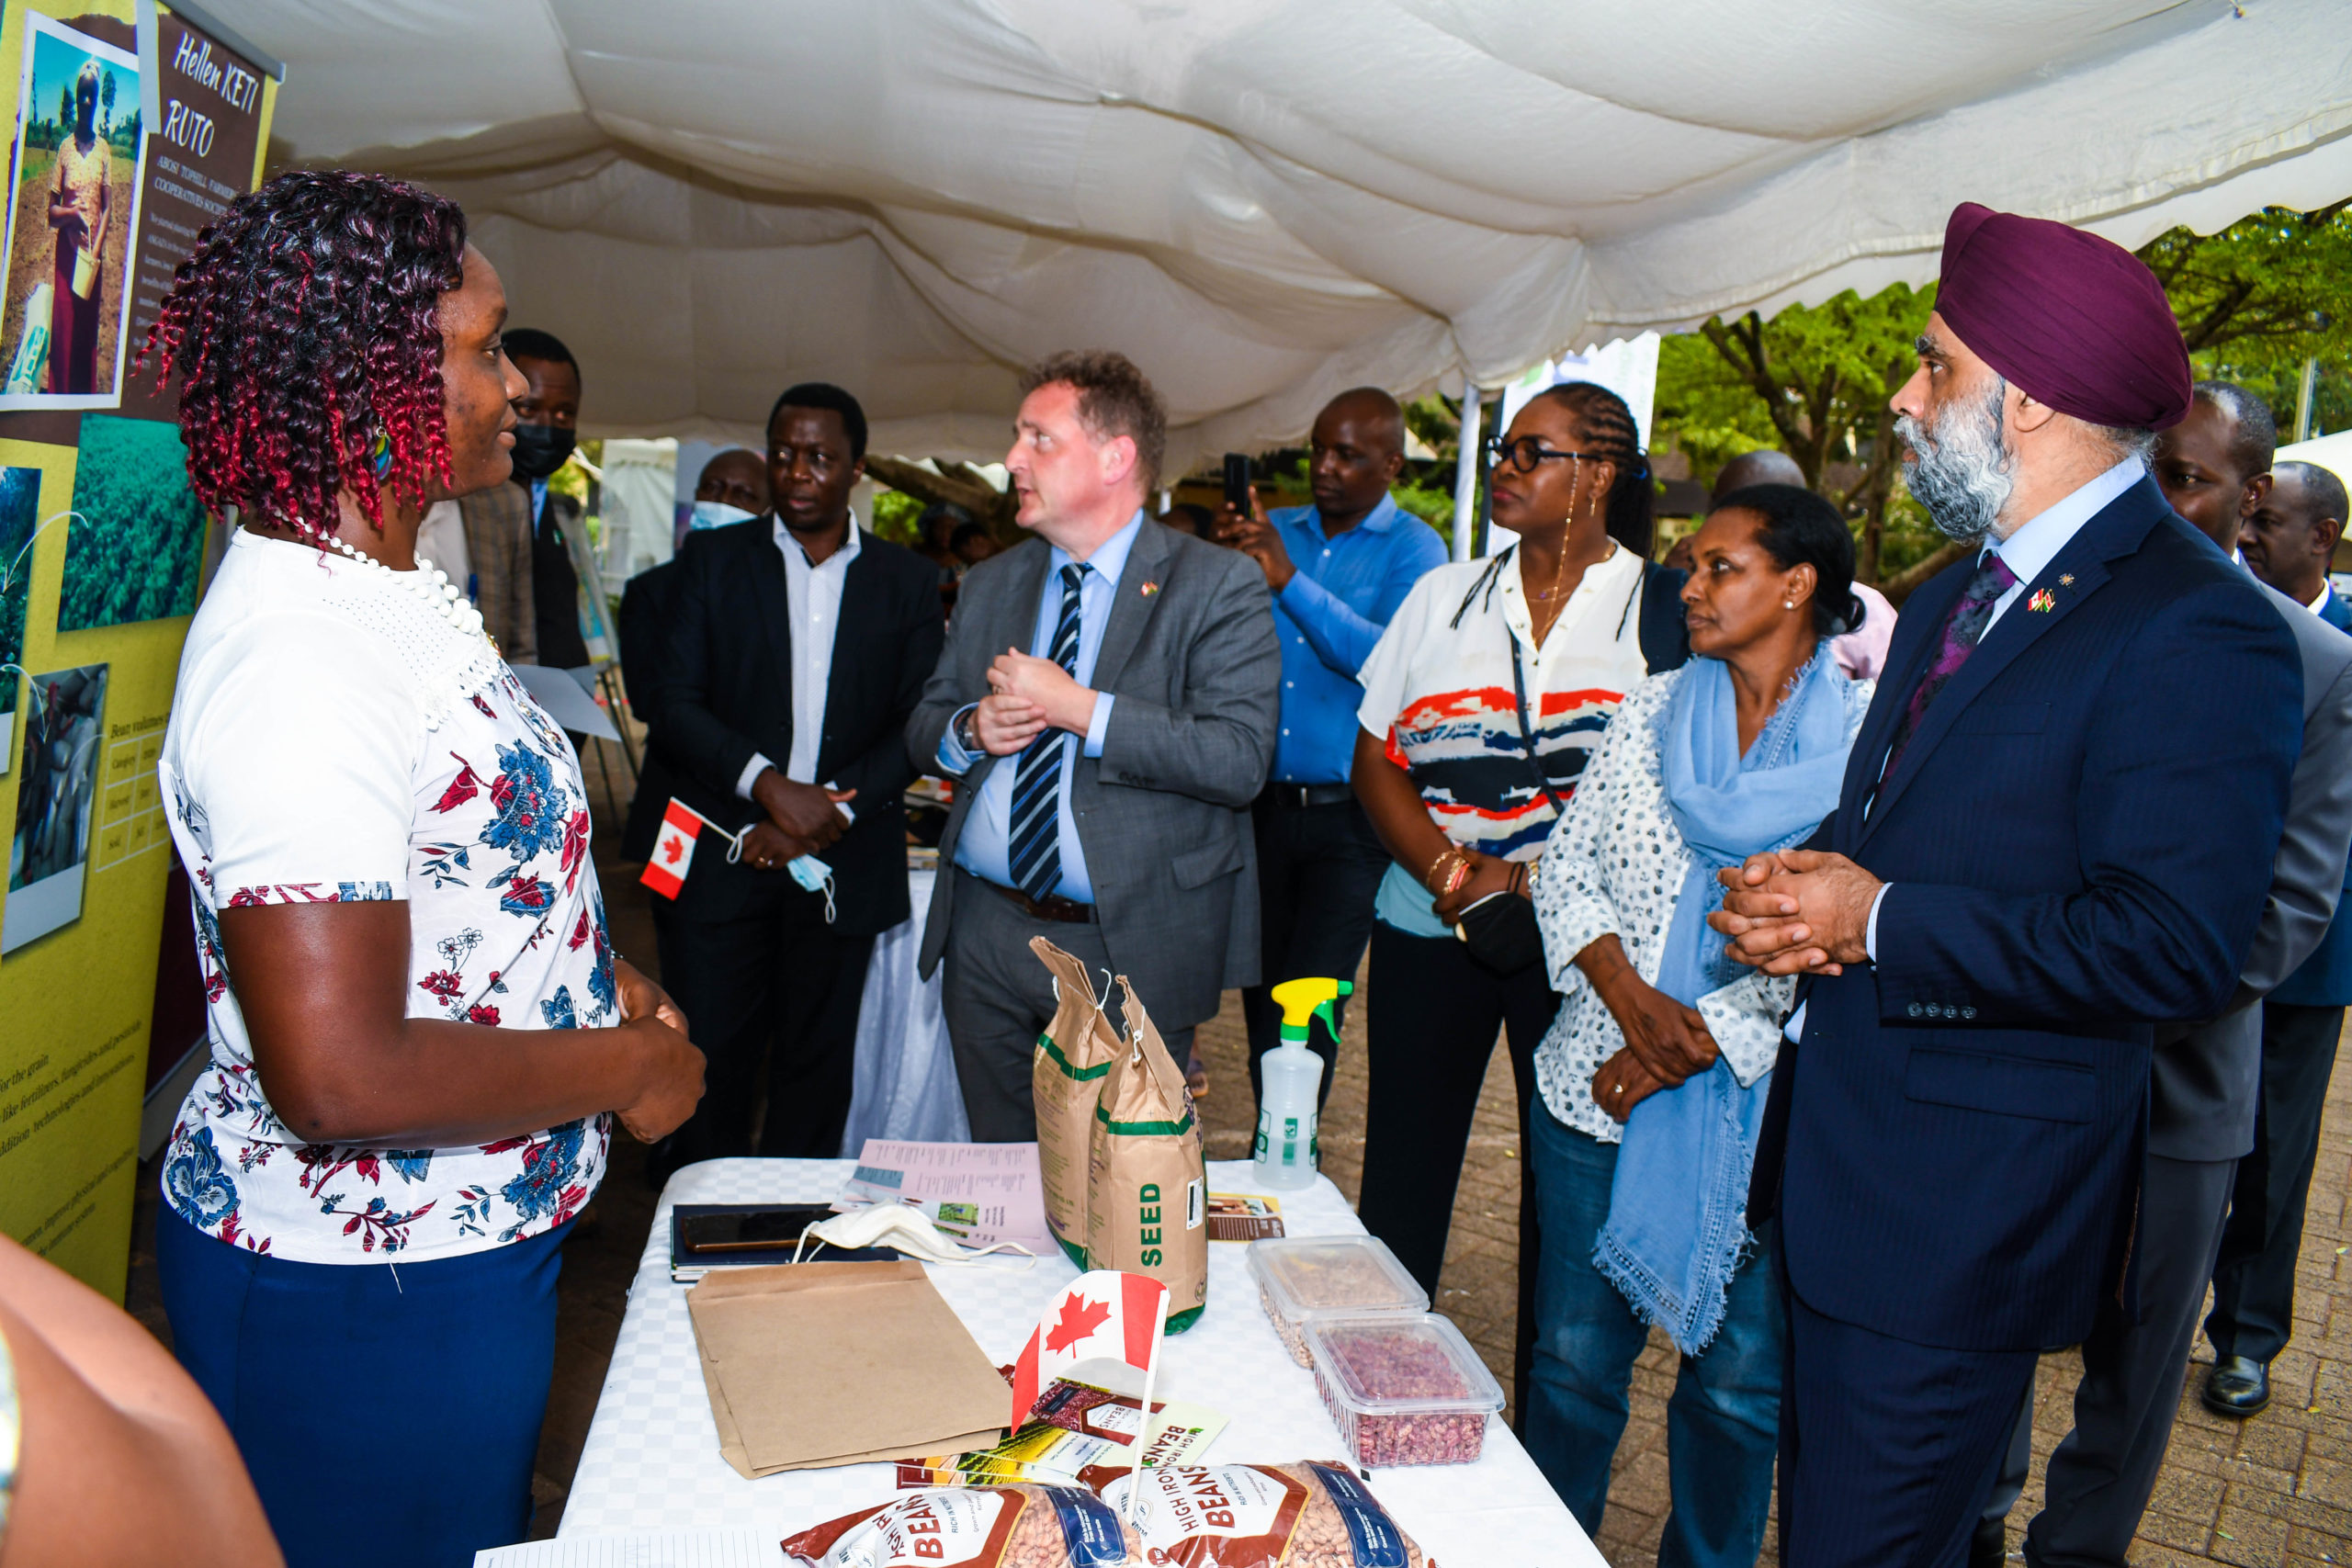 Canada’s partnership contributes to improved food security and inclusive entrepreneurship in Africa